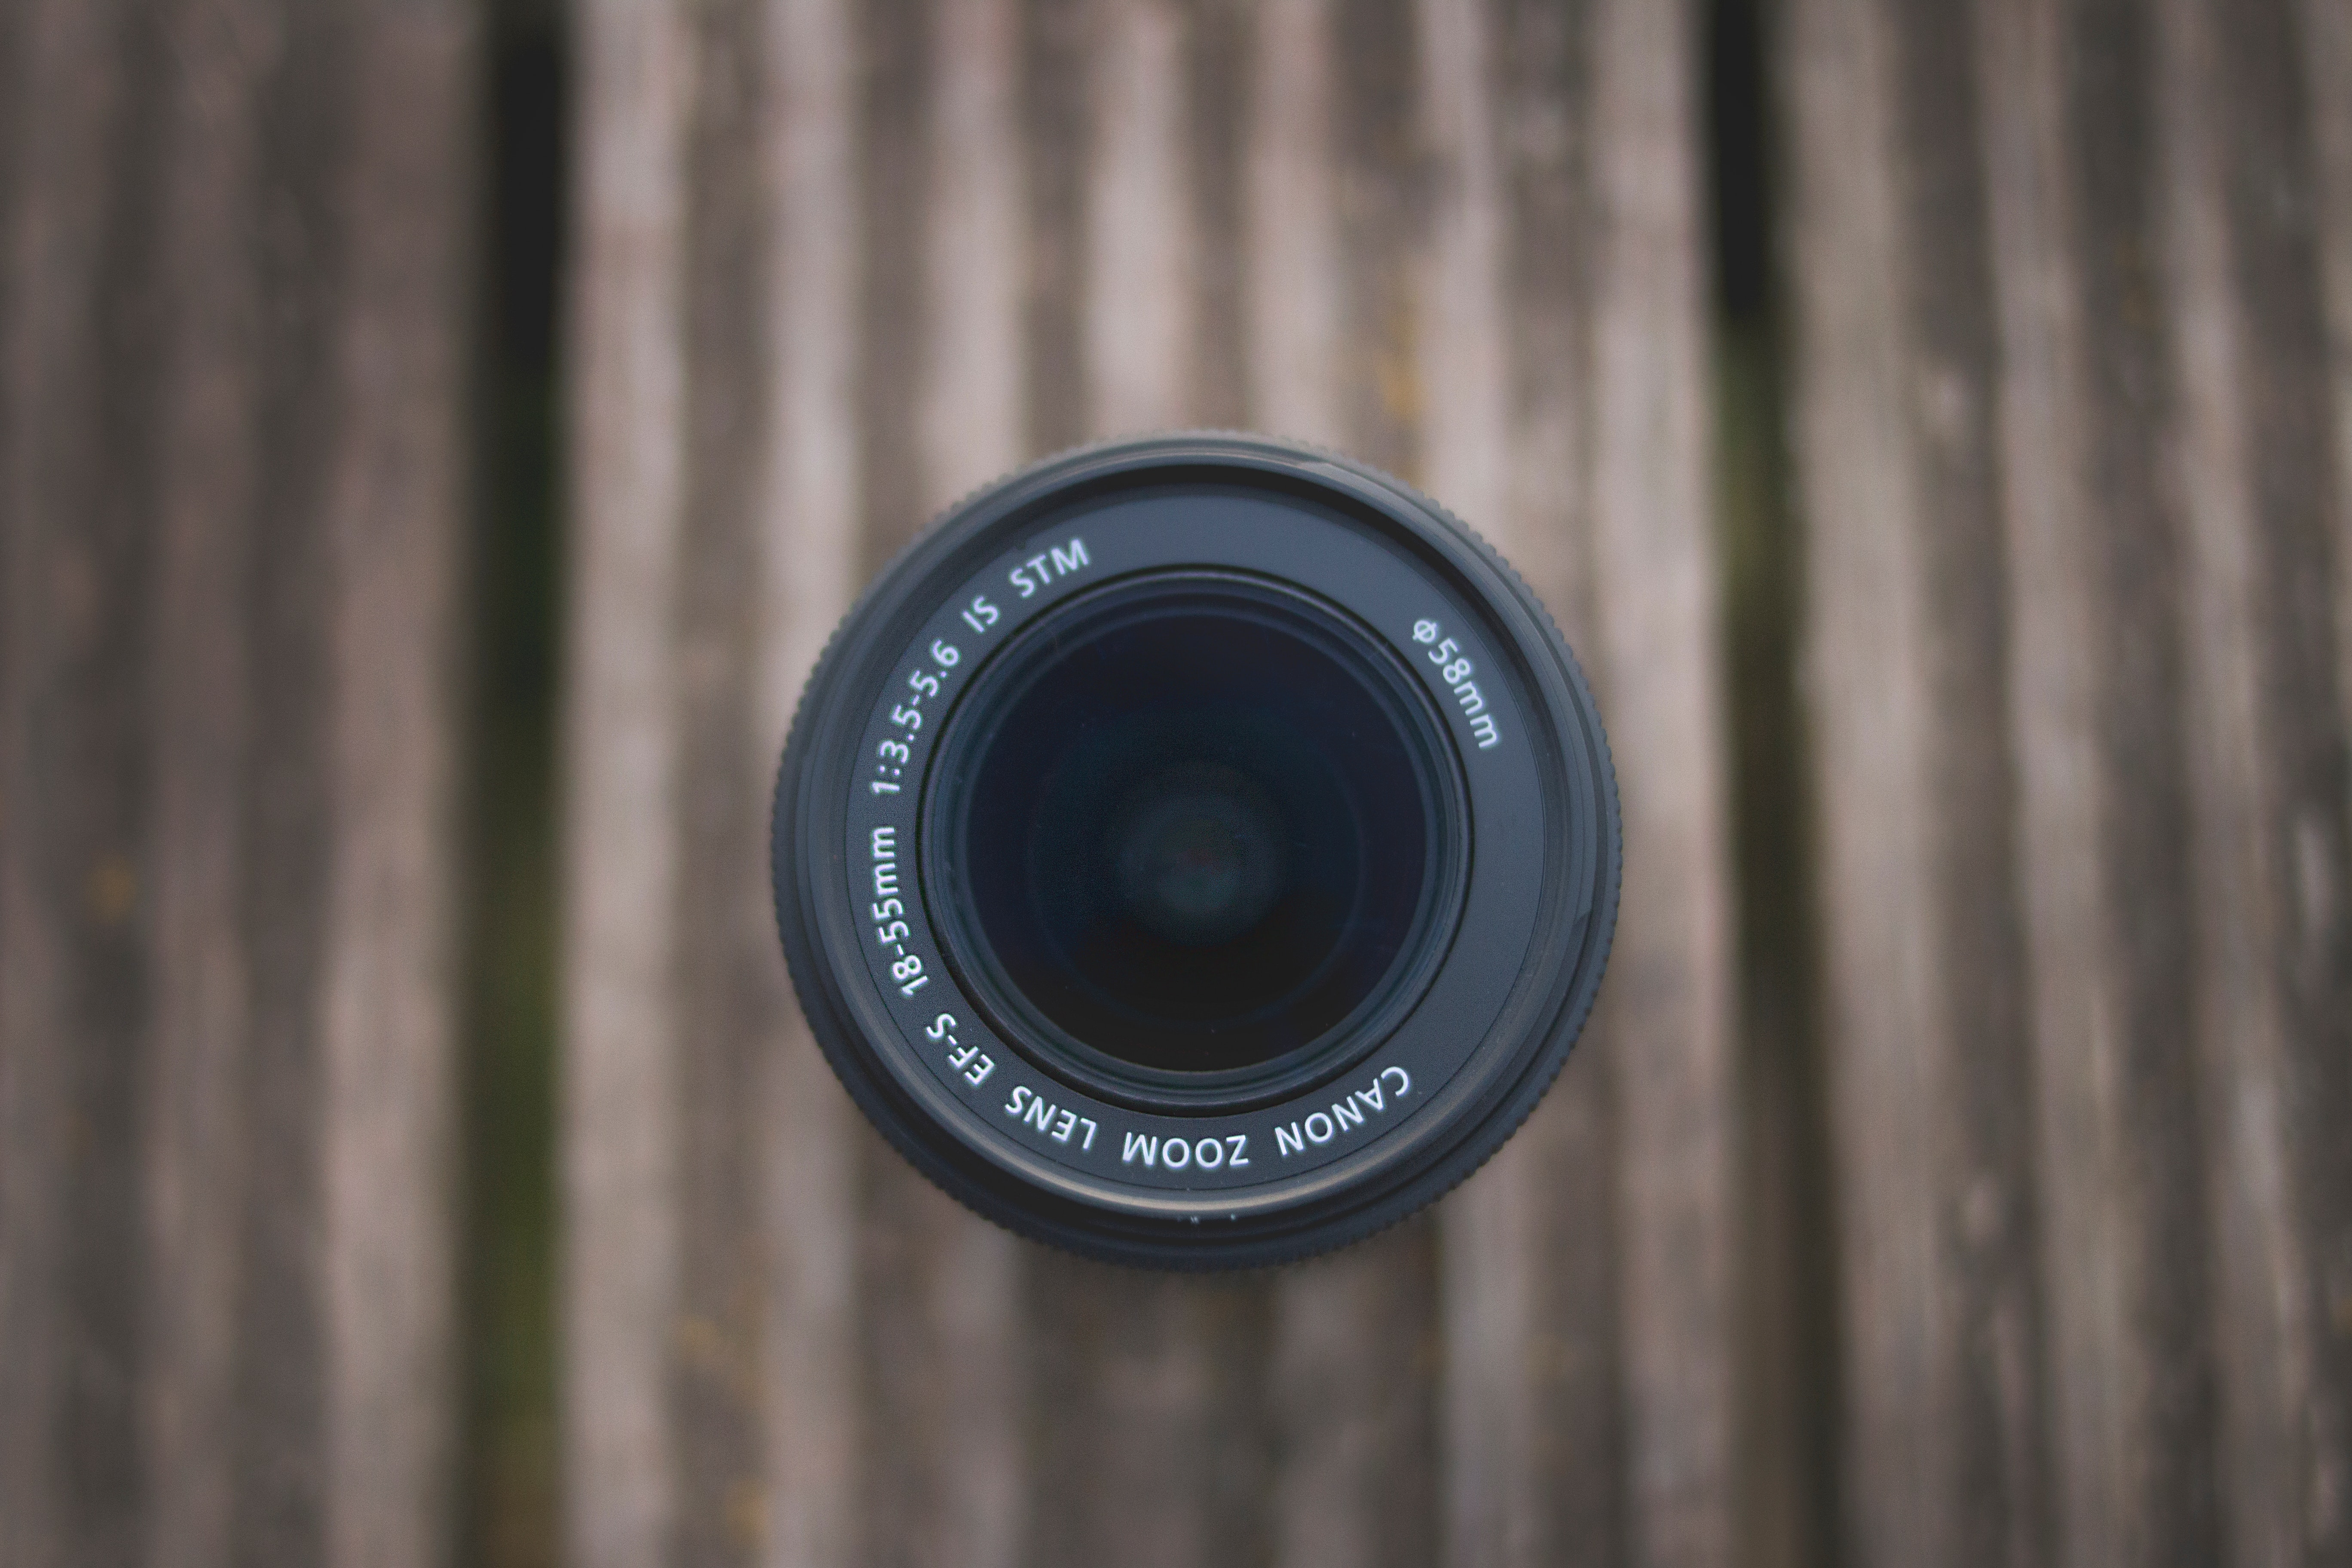 Top-view photography of canon dslr camera lens